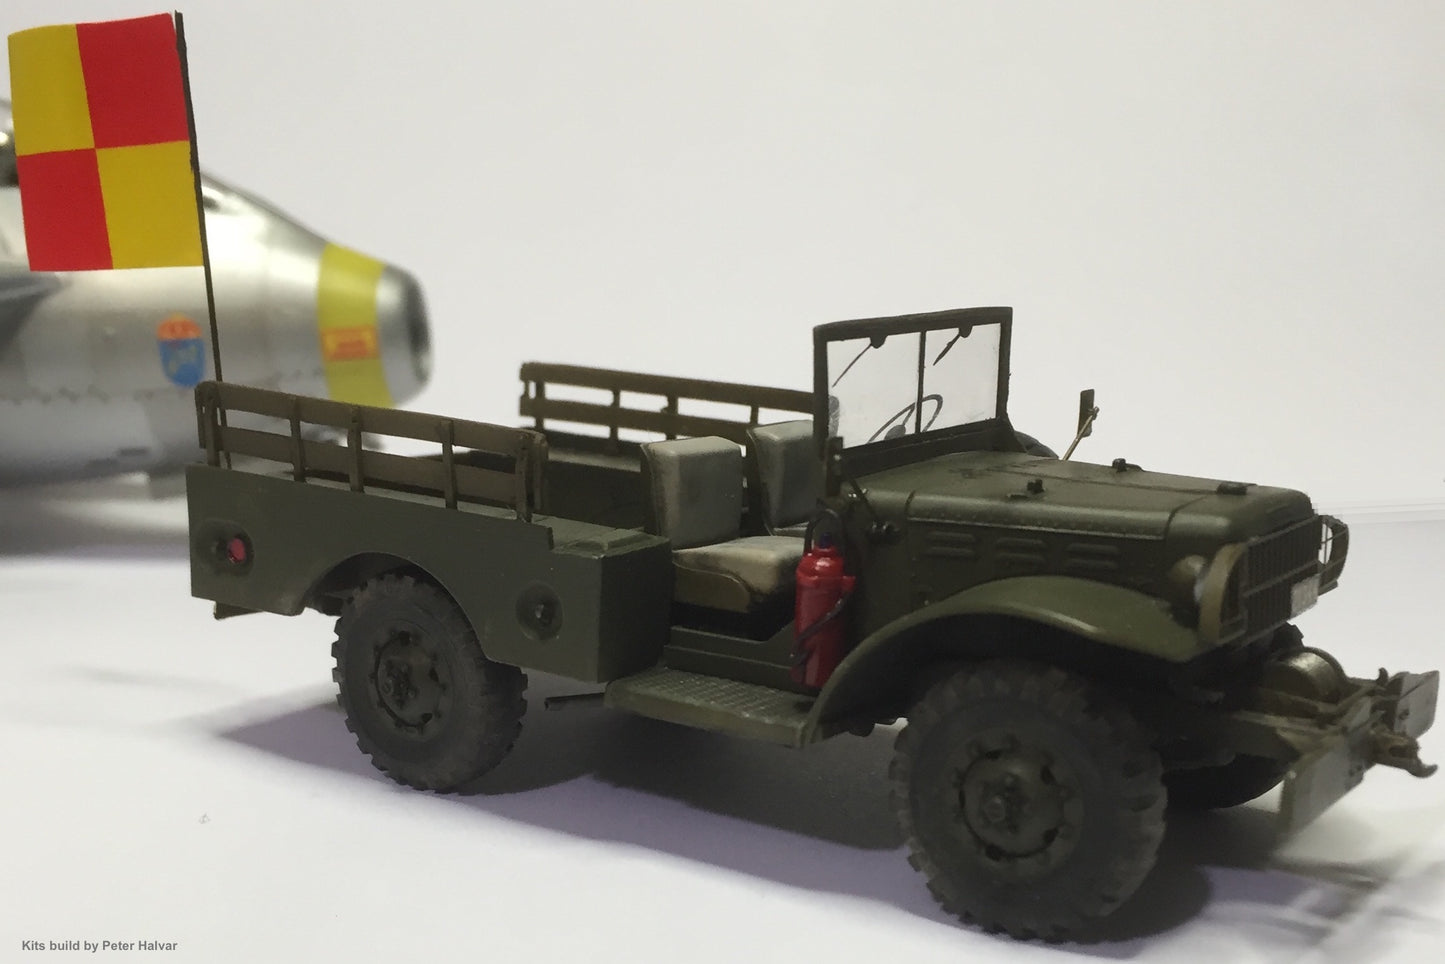 Dodge WC52 Jeep in 1/48 scale. 48R004